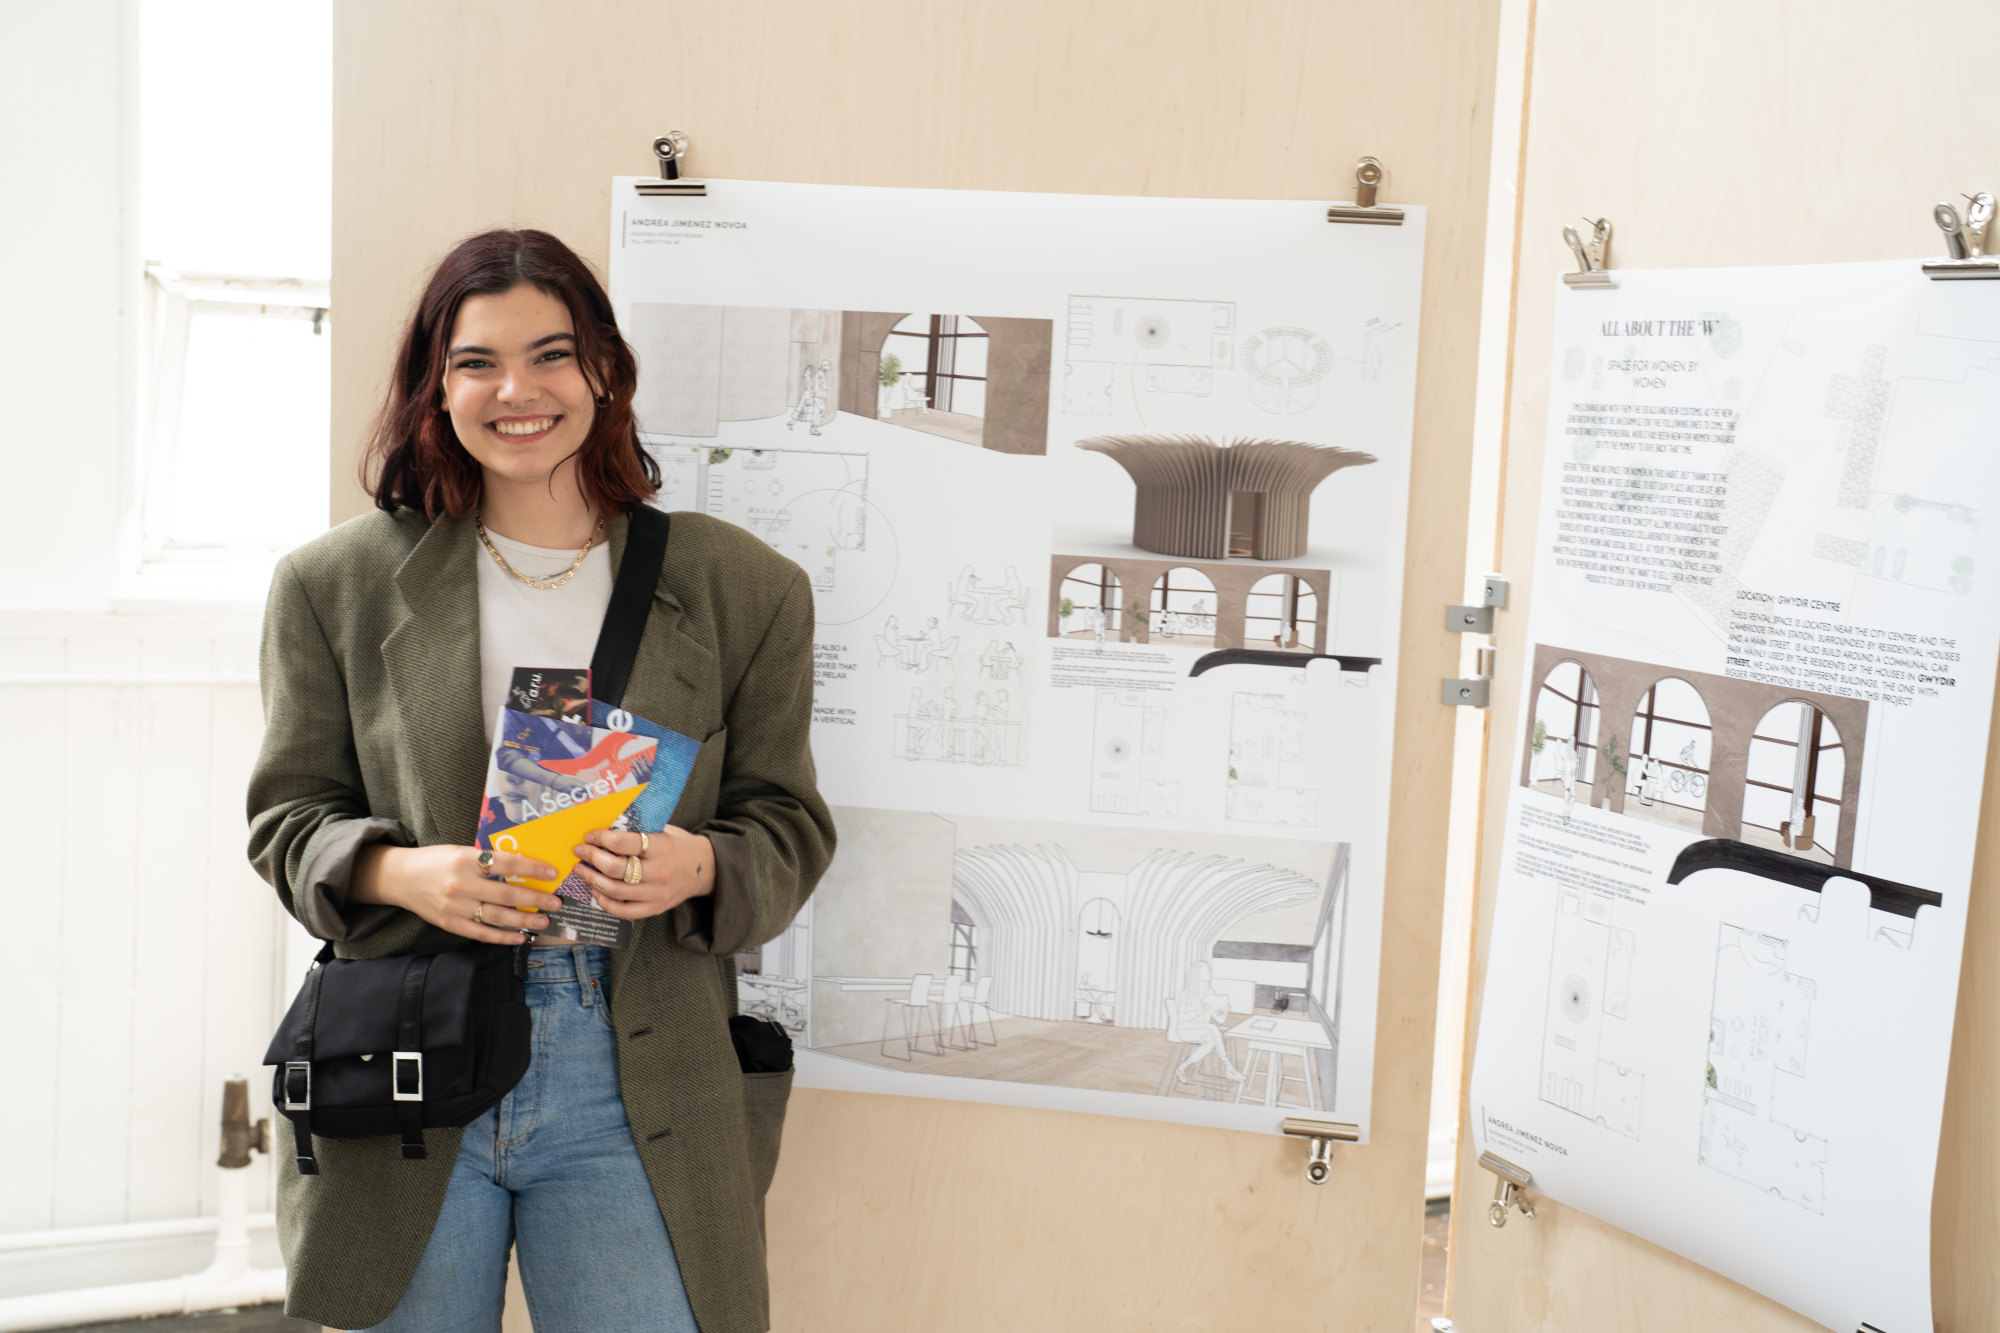 A young woman next to building design drawings